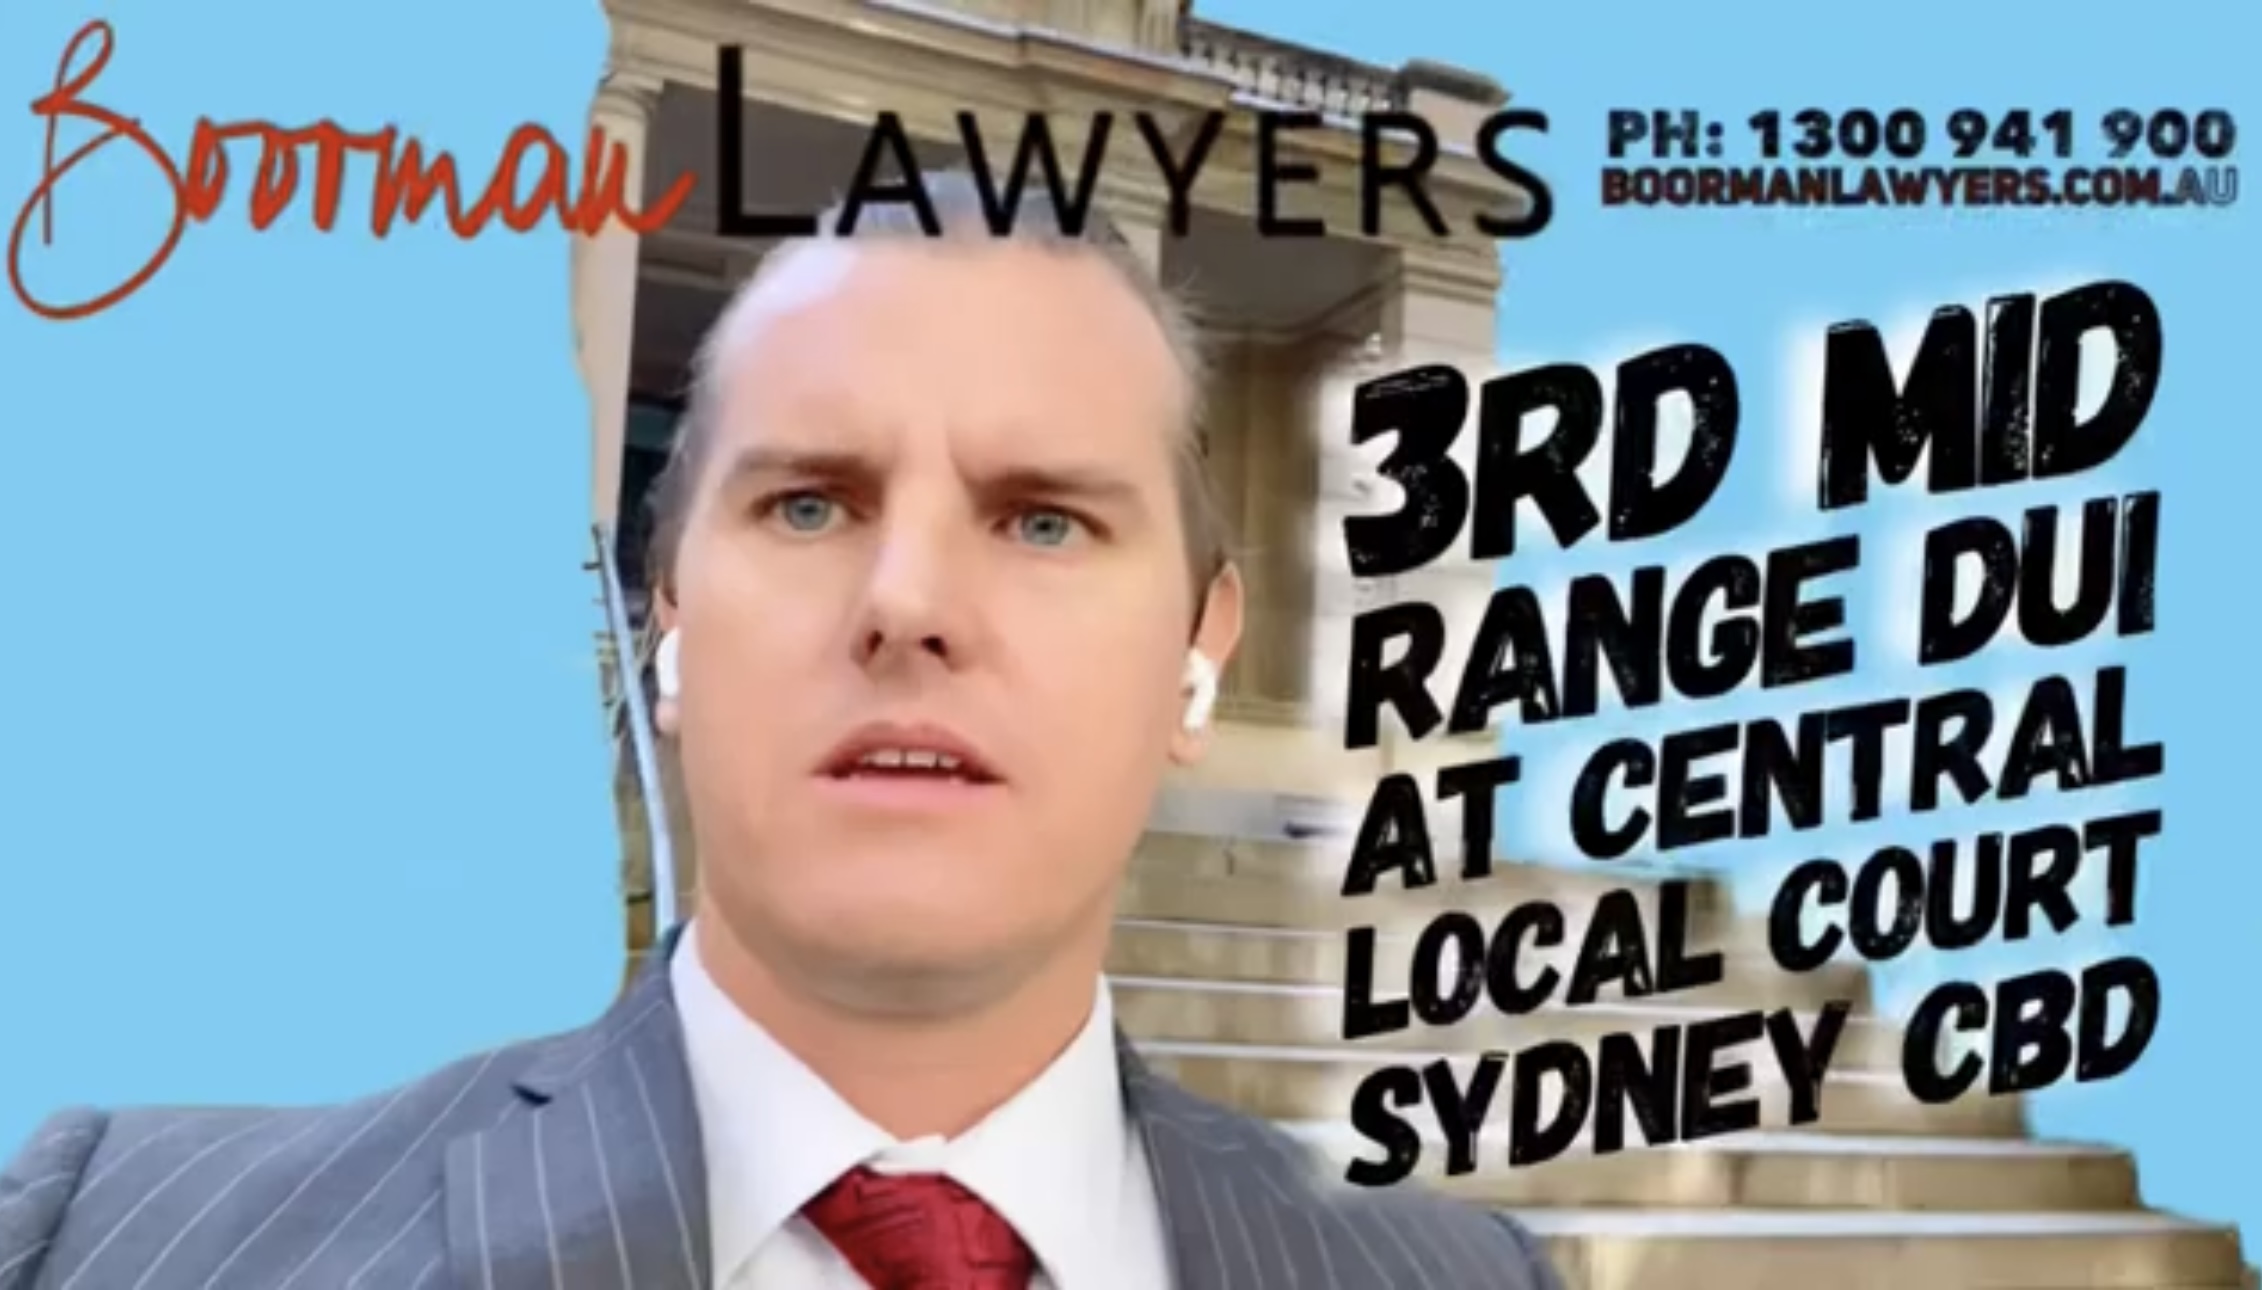 Sydney City Dui Lawyer Represent Repeat Offence On 4th Dui 3017